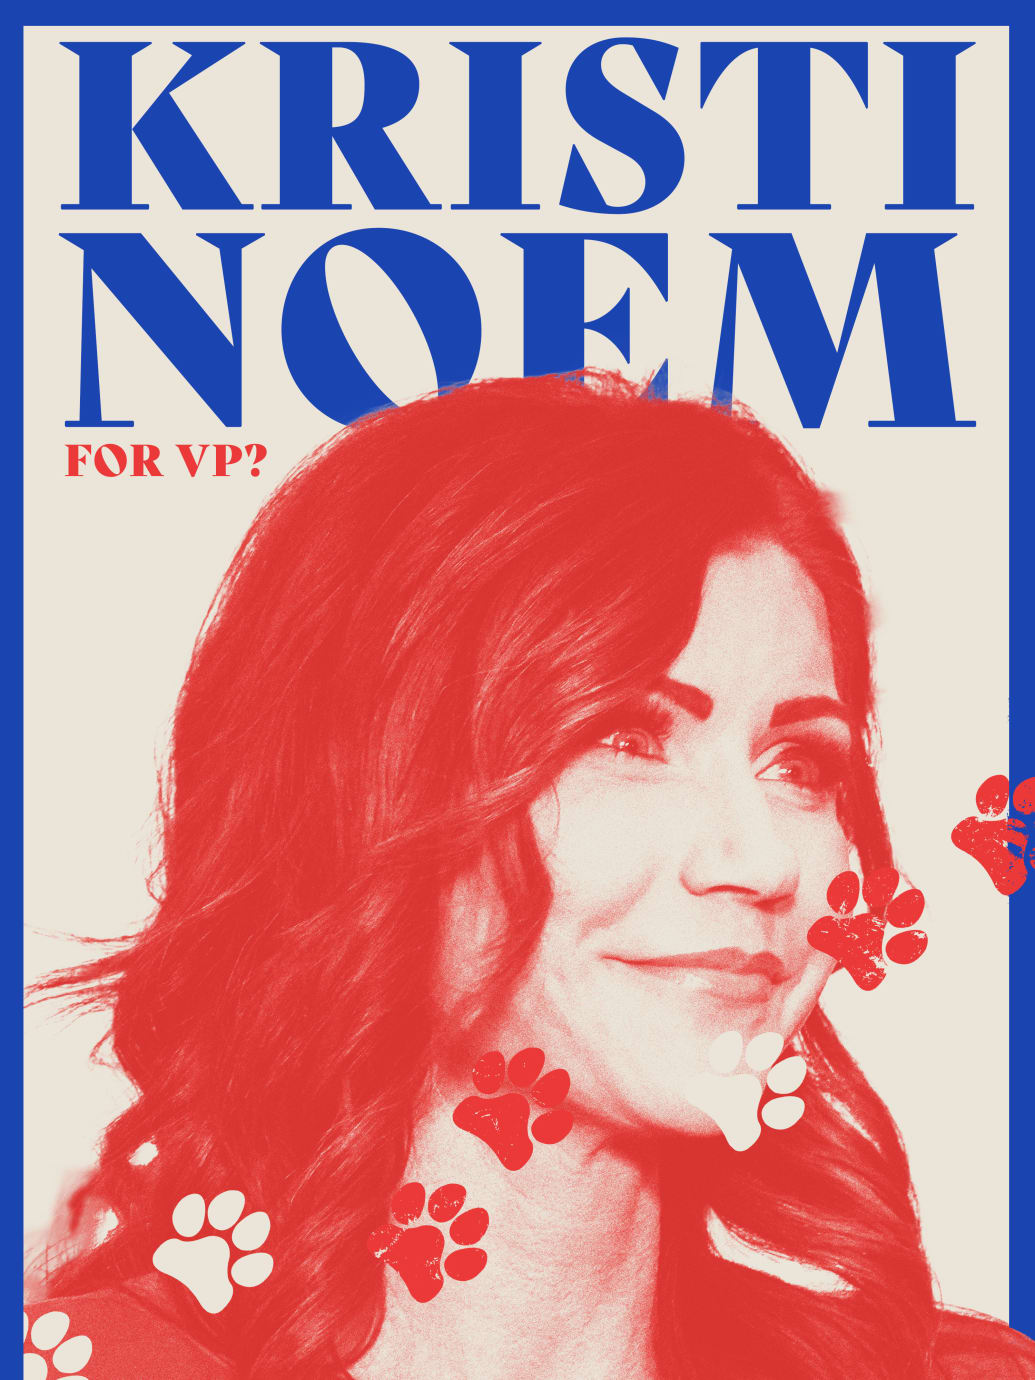 Vice Presidential campaign poster featuring Kristi Noem